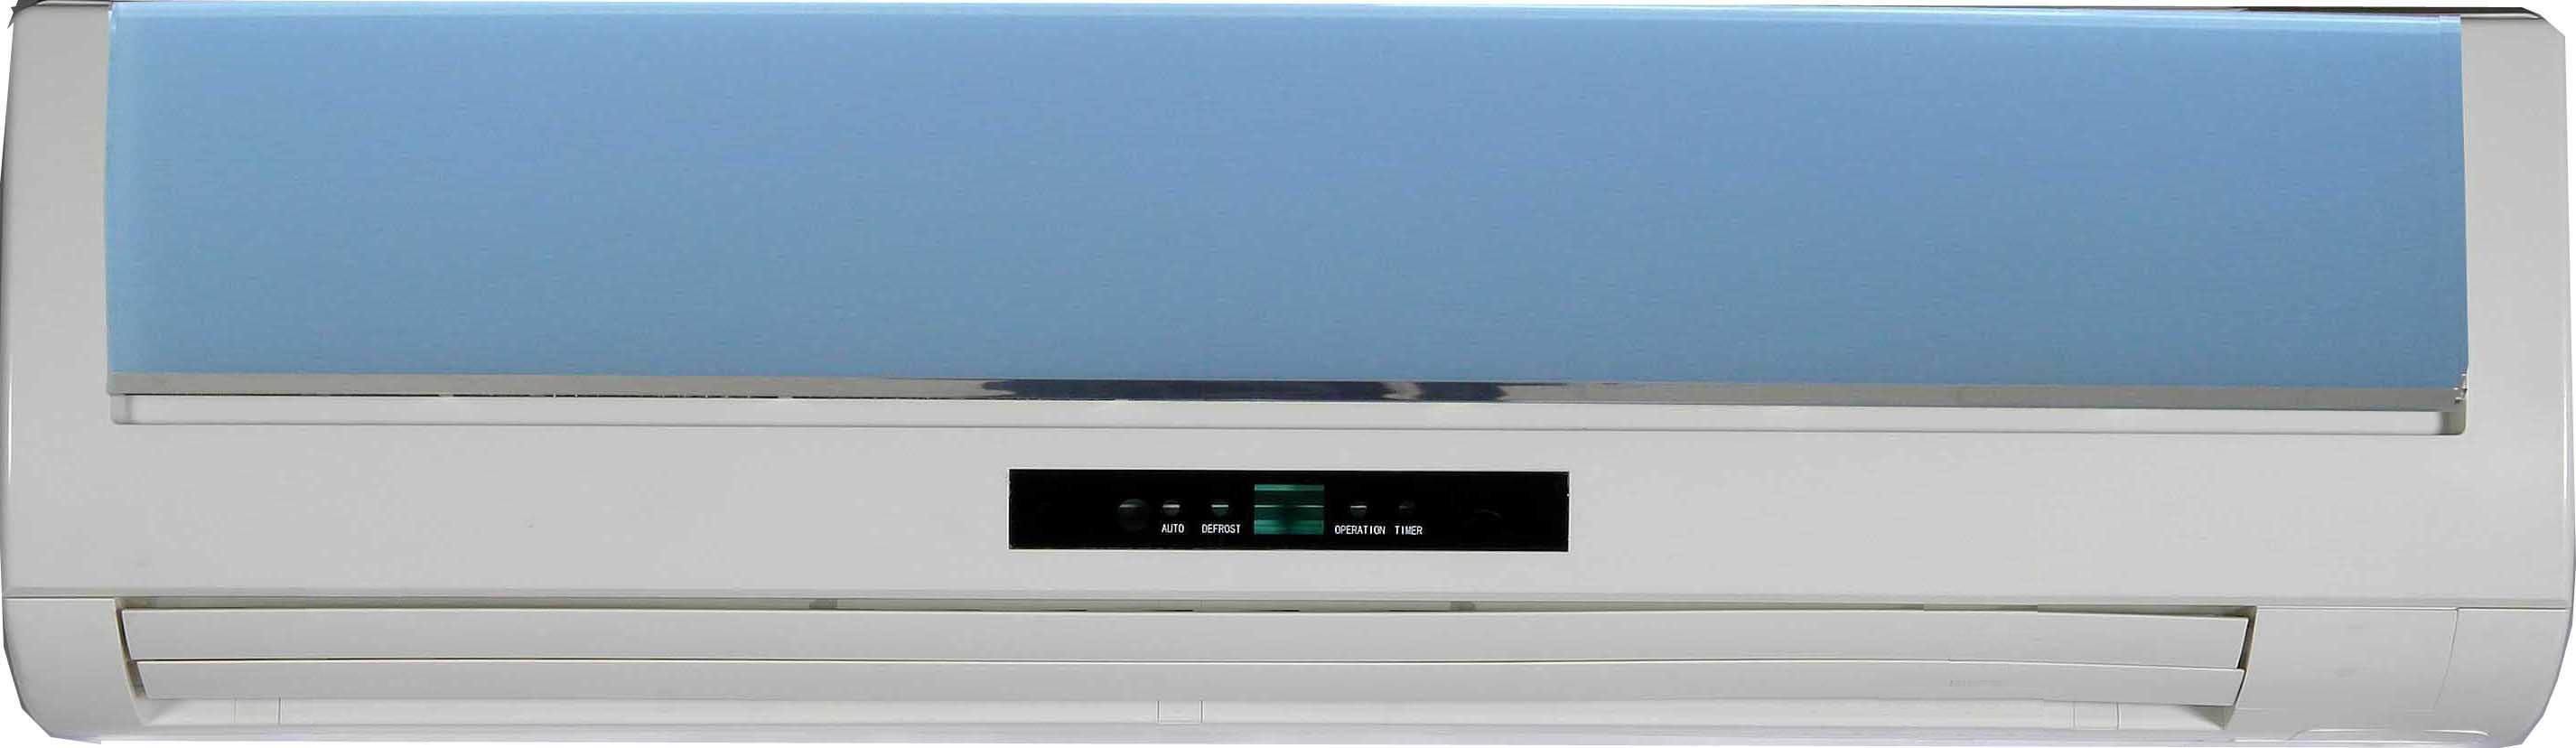 Wall Split Type Air Conditioner (J Series)